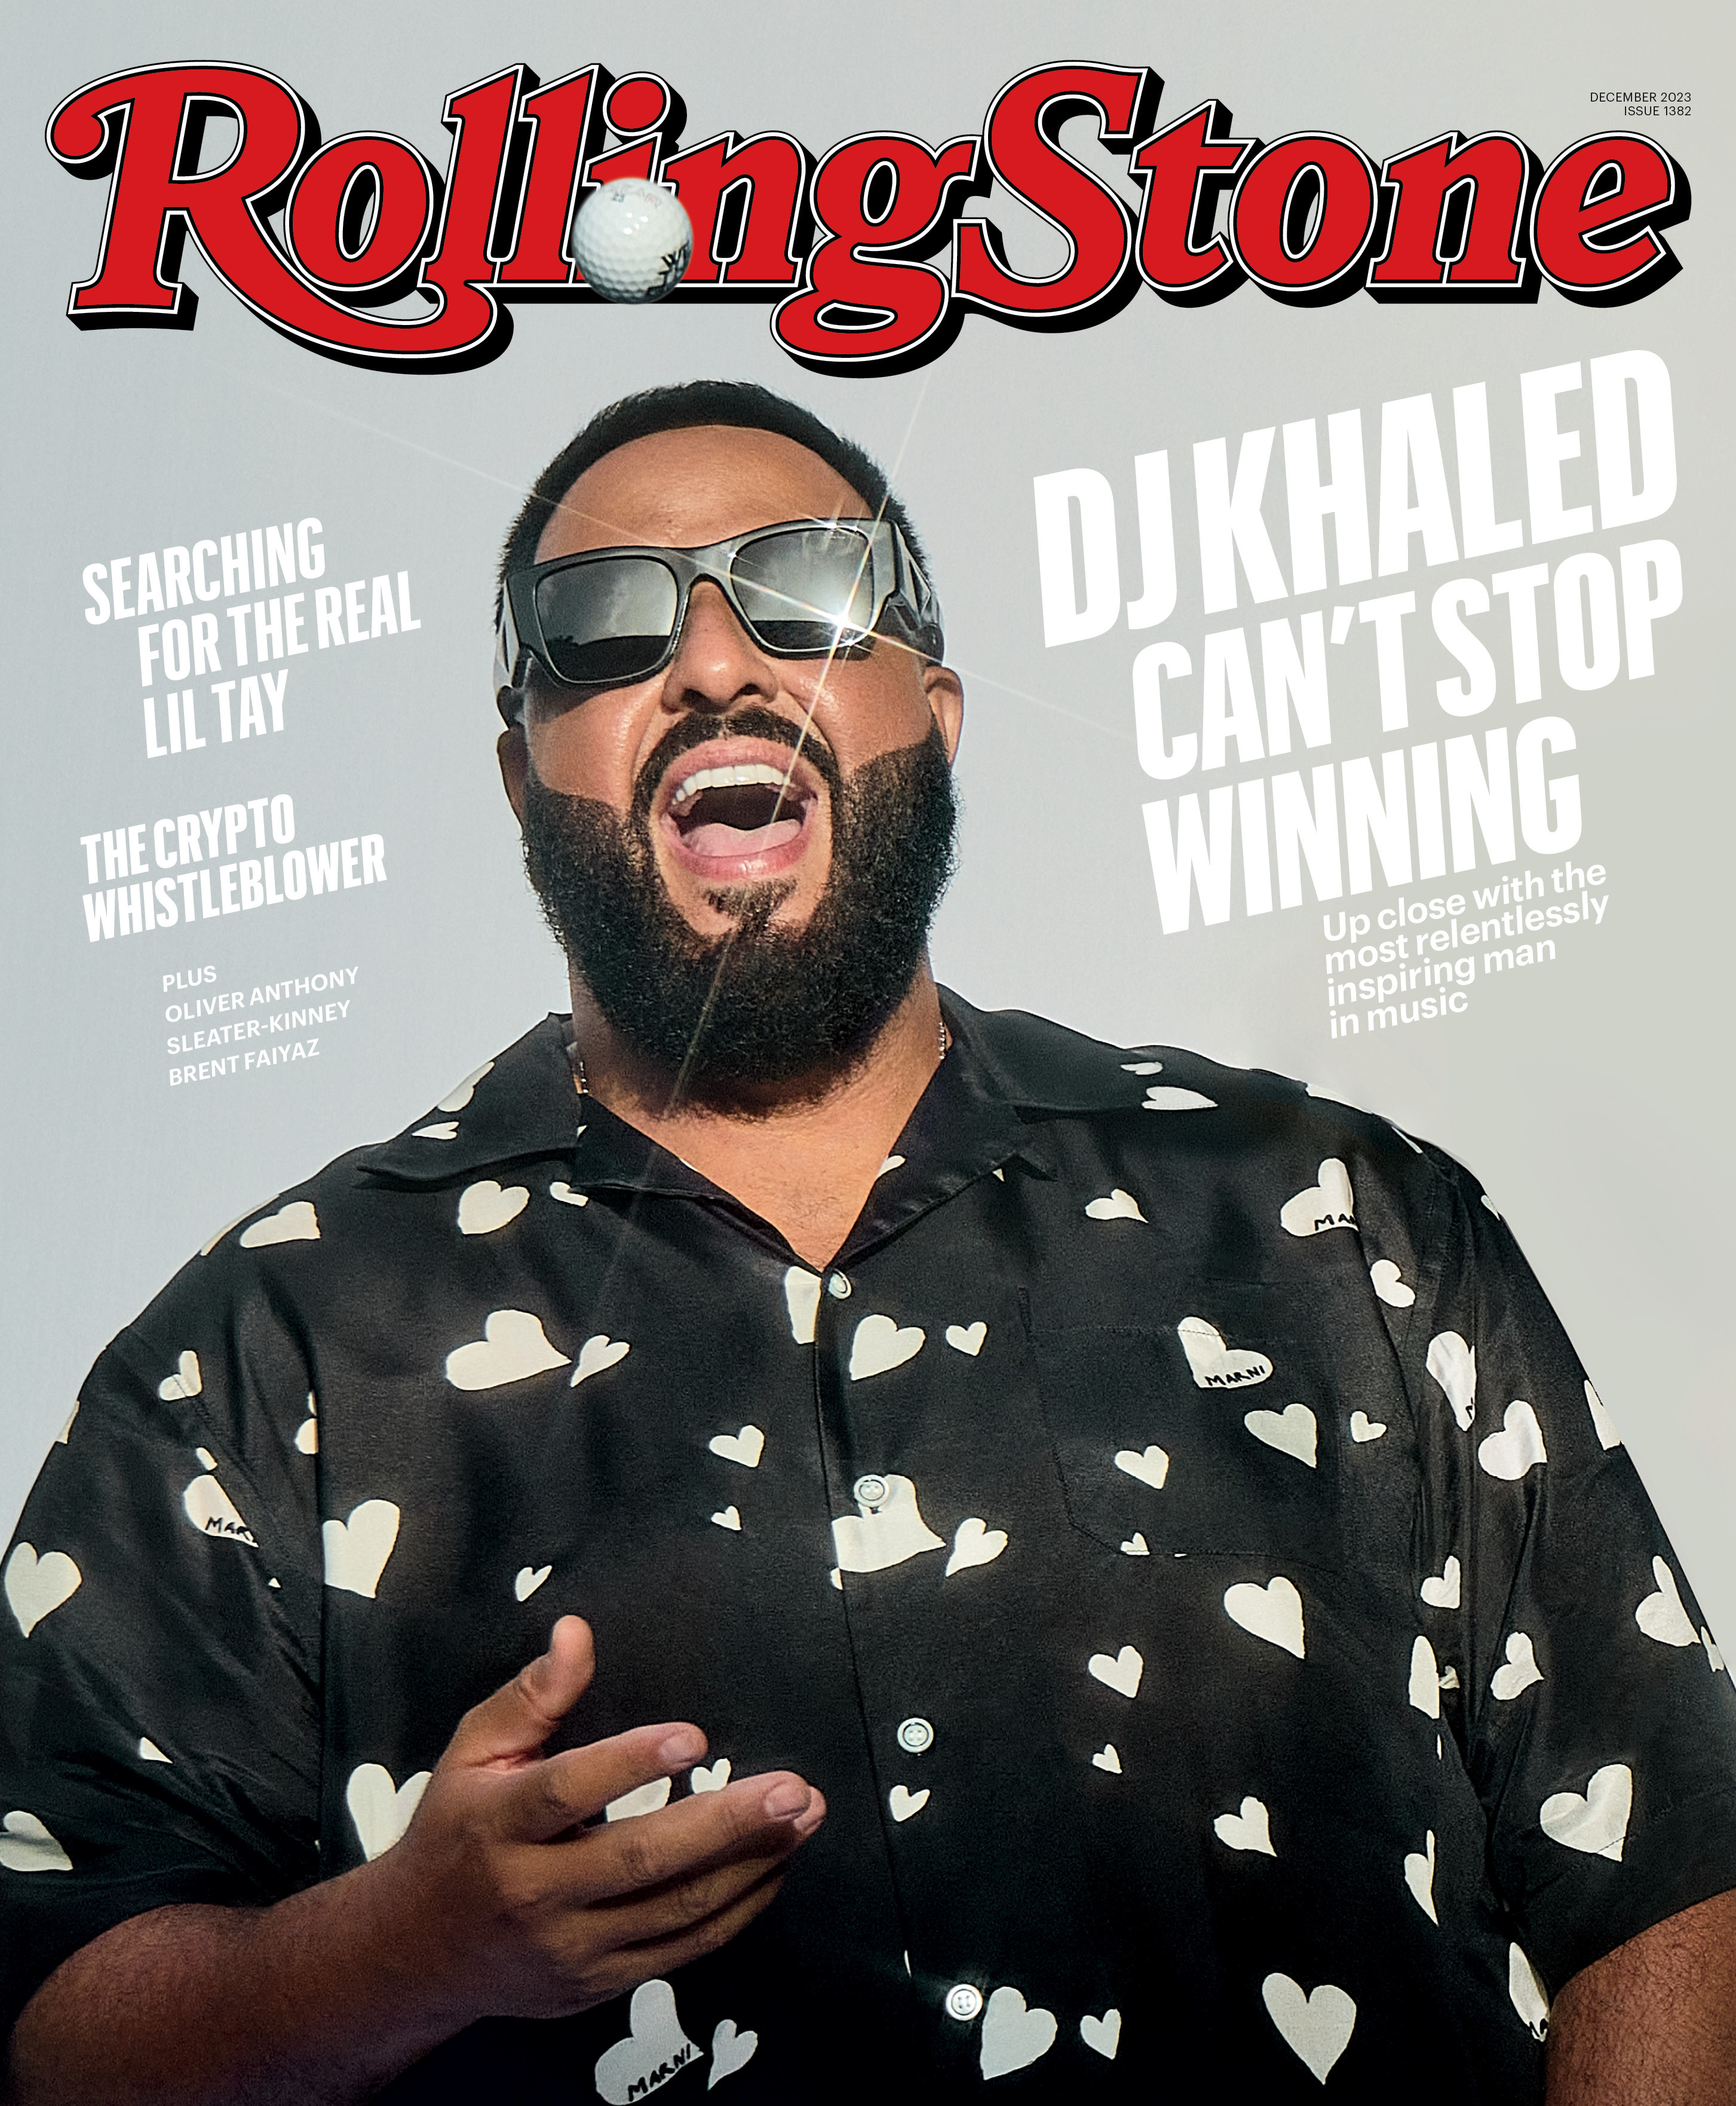 This is my second time in @rollingstone in 18 months. First as a